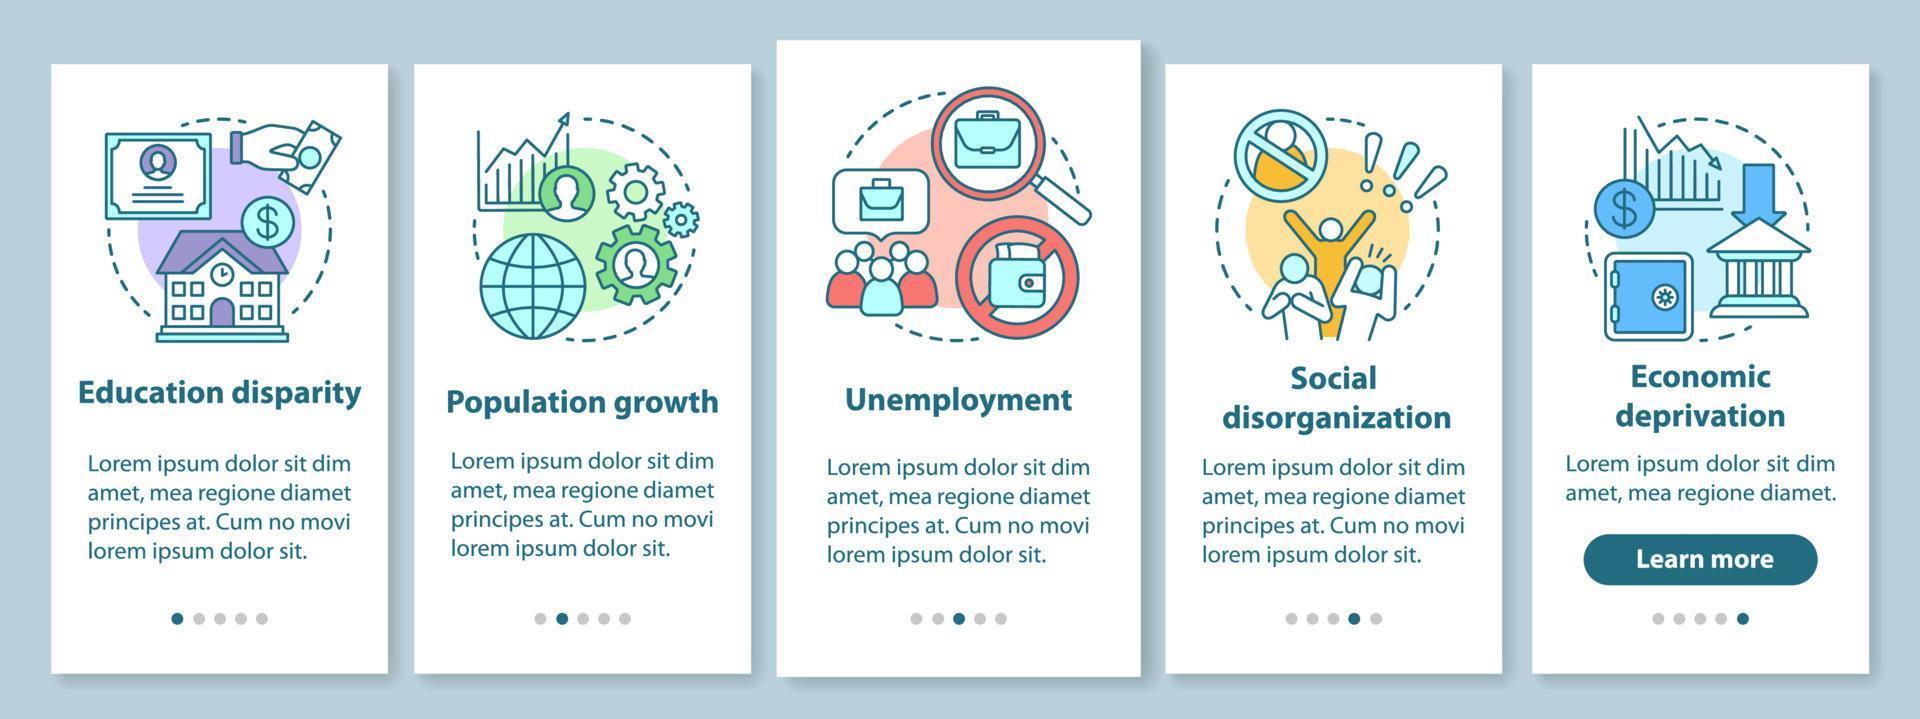 Social problems onboarding mobile app page screen with linear concepts. Unemployment, economic deprivation, population growth walkthrough graphic instructions. UX, UI, GUI vector template with icons